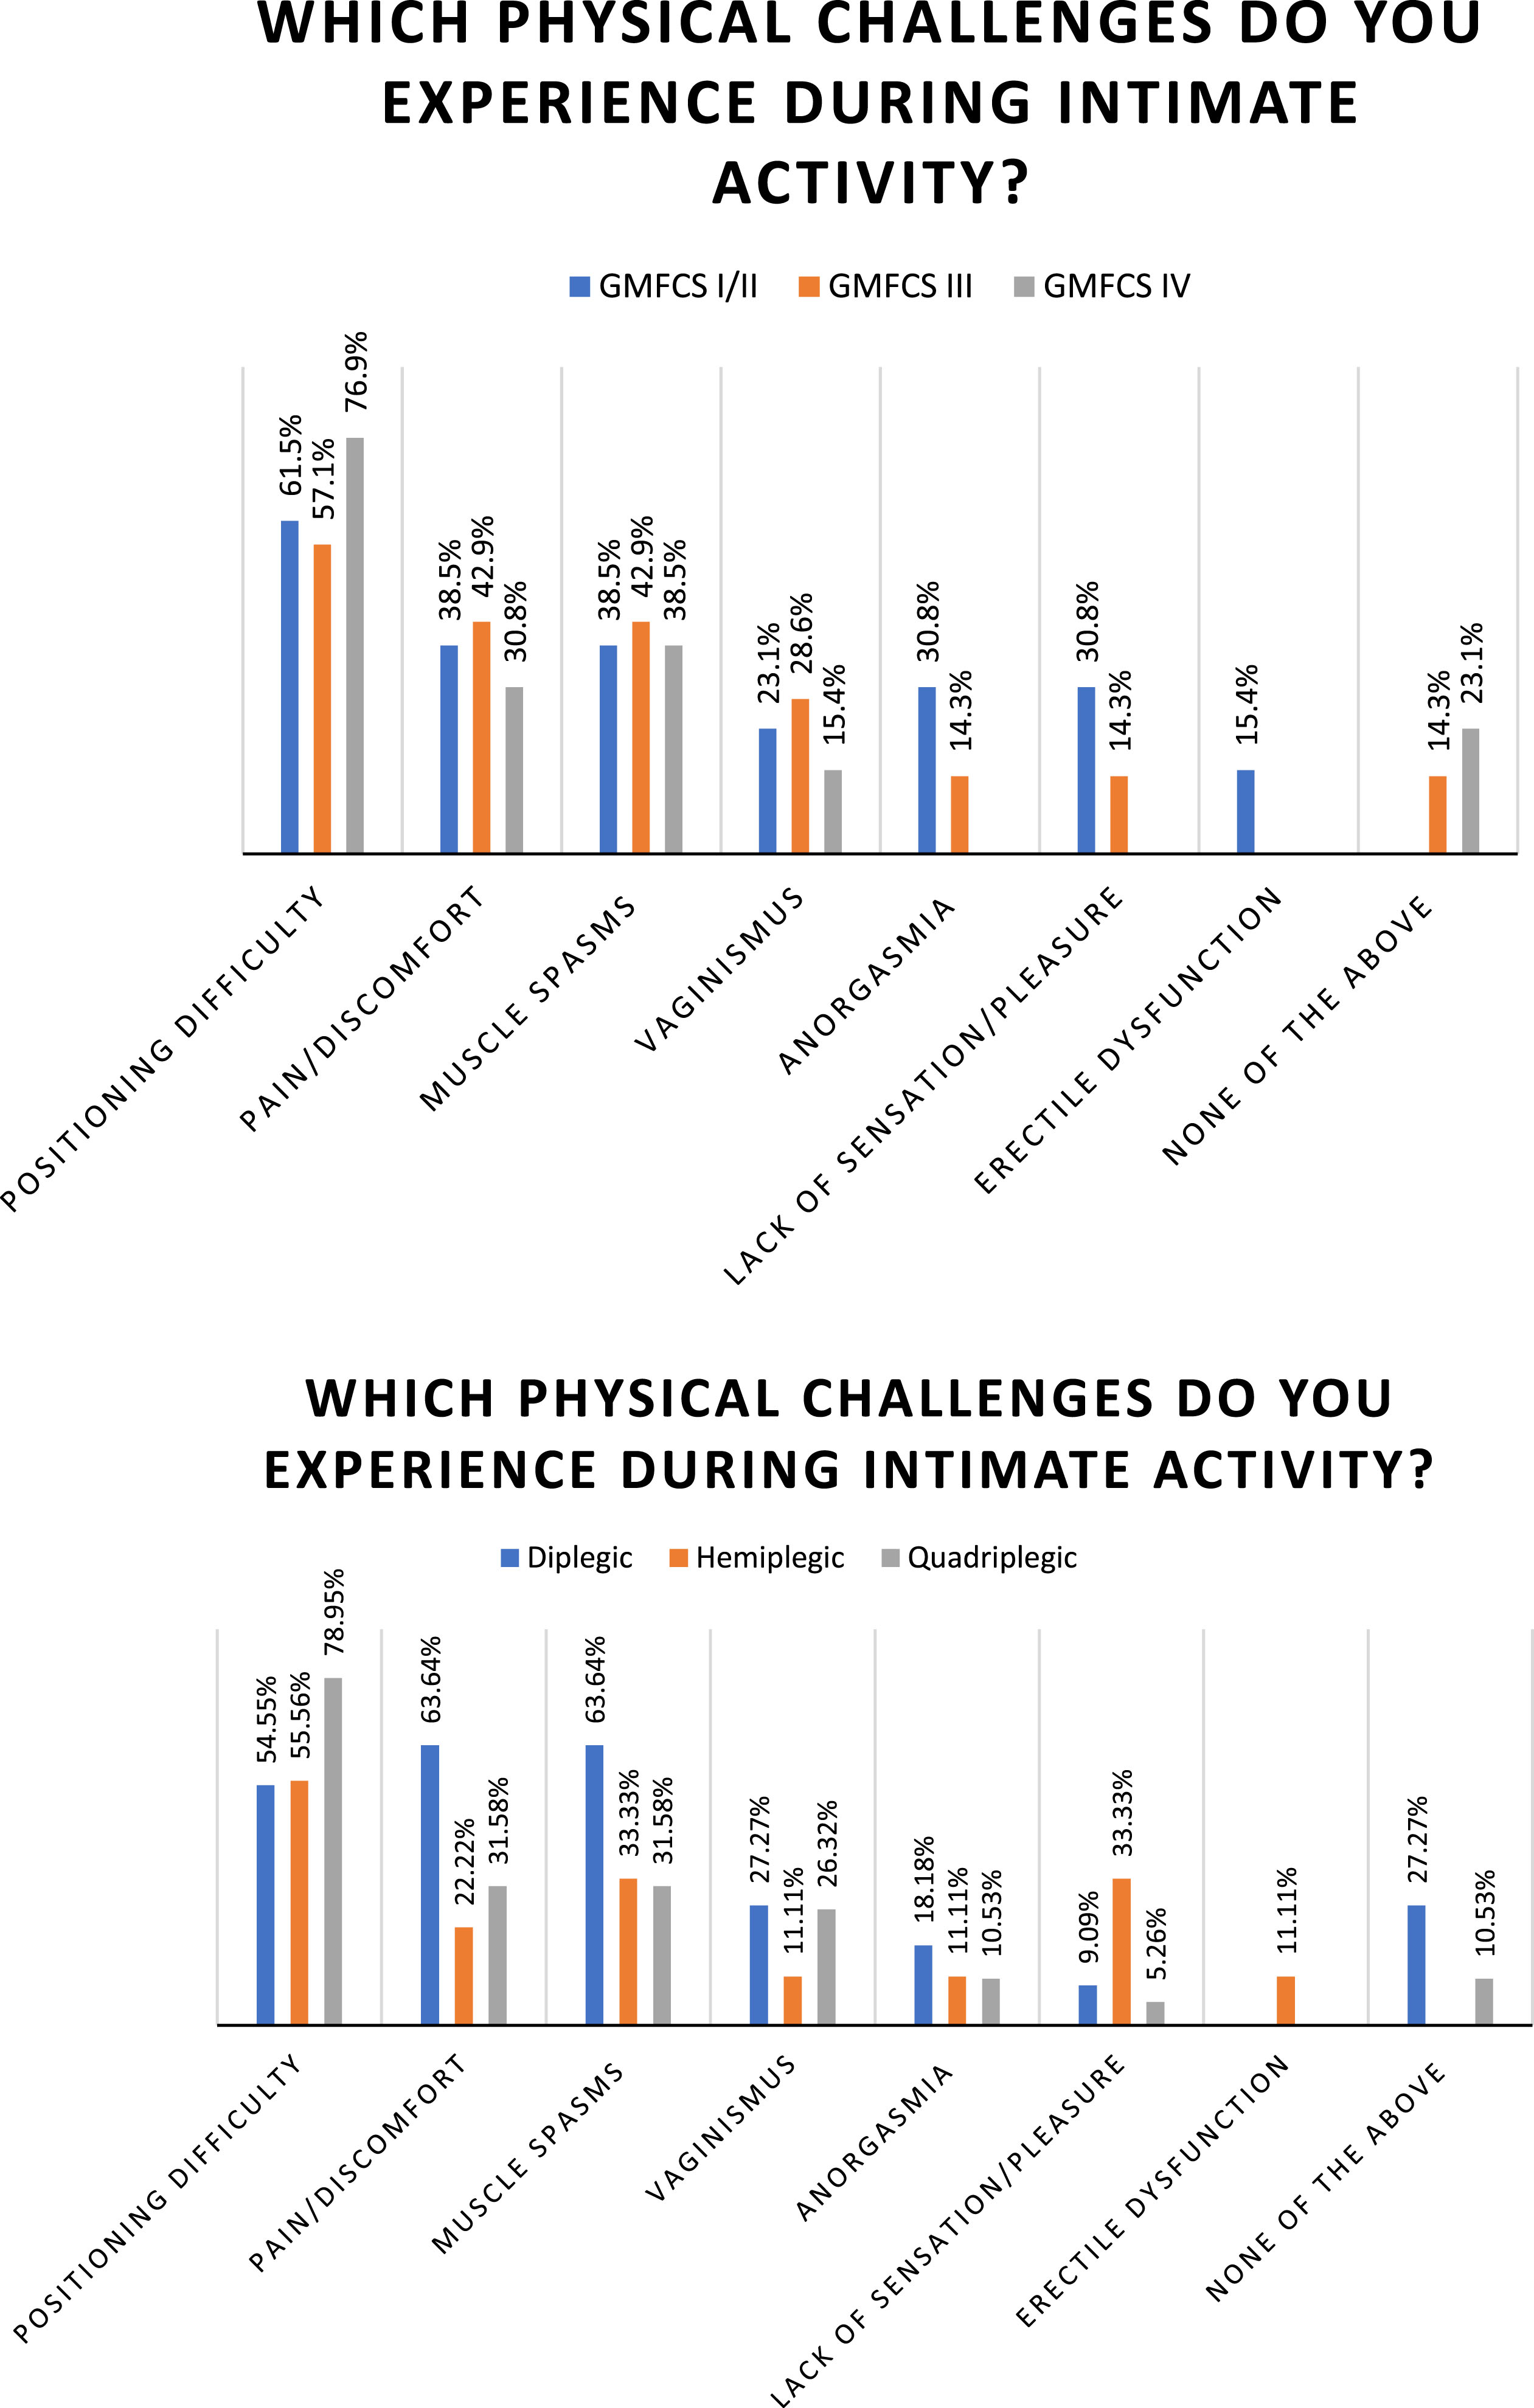 Physical challenges experienced during intimate activity by (a) Gross Motor Function Classification System (GMFCS) level and (b) topographical distribution.